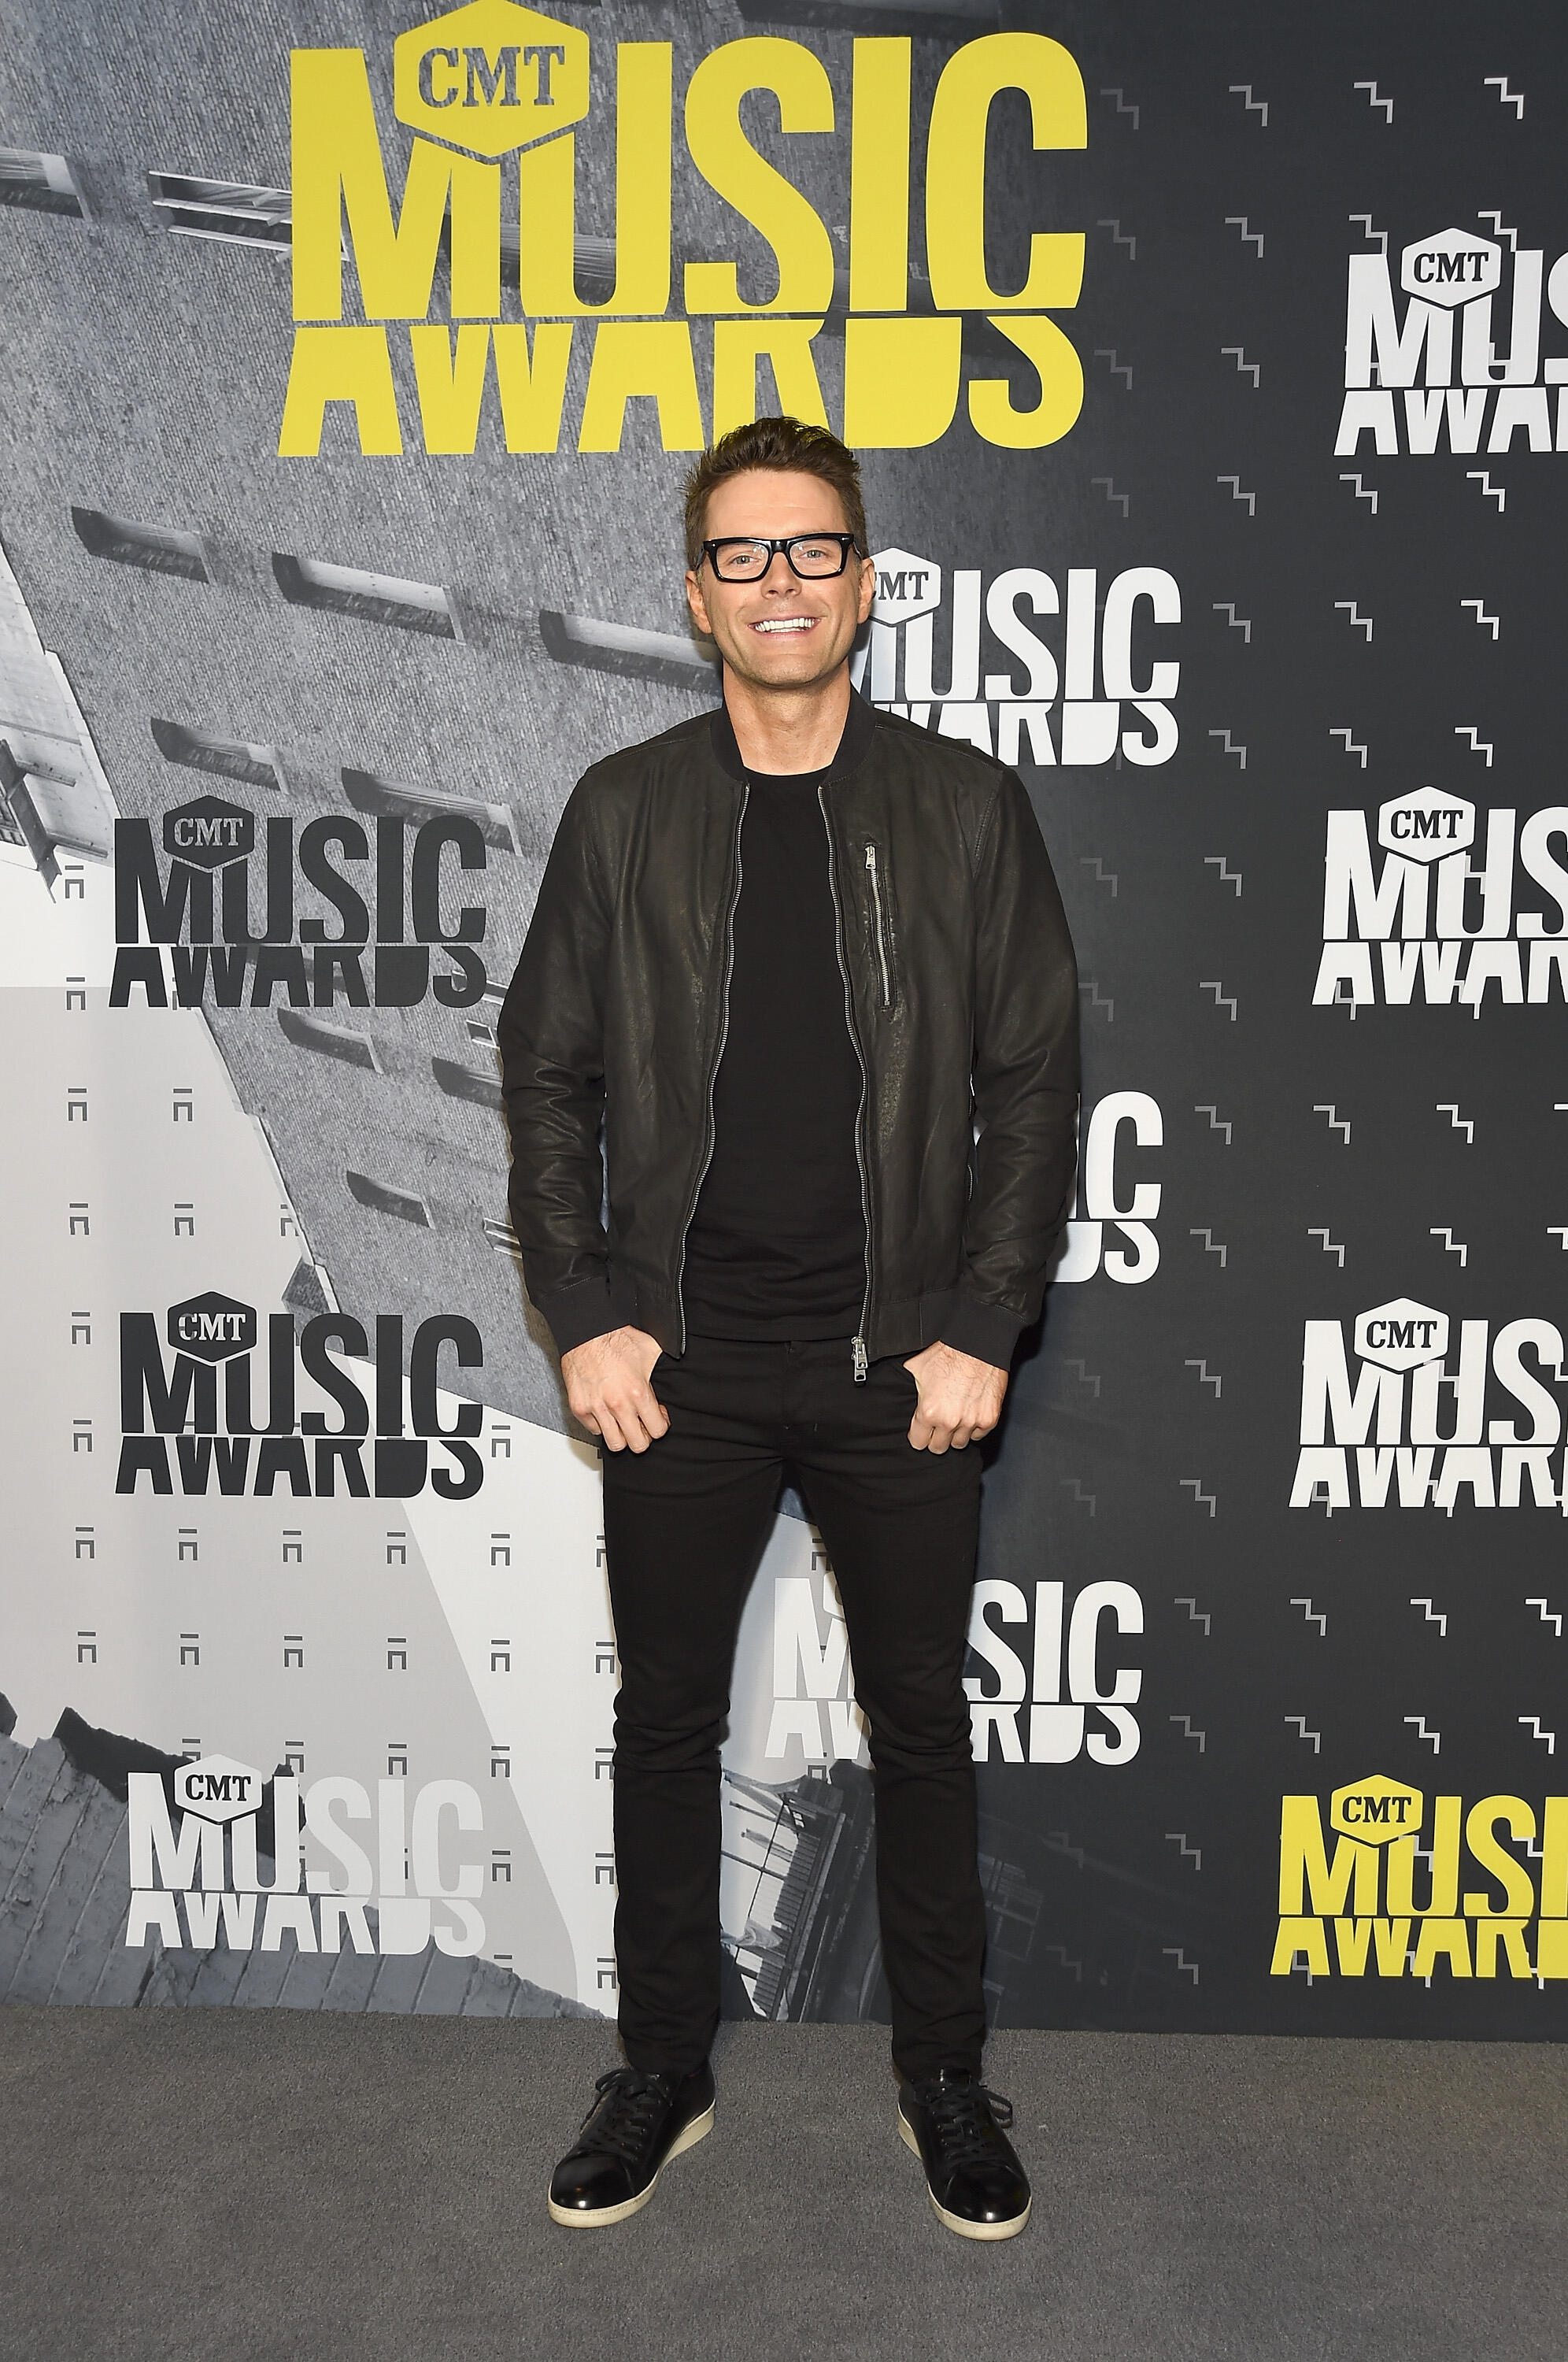 NASHVILLE, TN - JUNE 07:  American radio personality Bobby Bones attends the 2017 CMT Music Awards at the Music City Center on June 7, 2017 in Nashville, Tennessee.  (Photo by Rick Diamond/Getty Images for CMT)